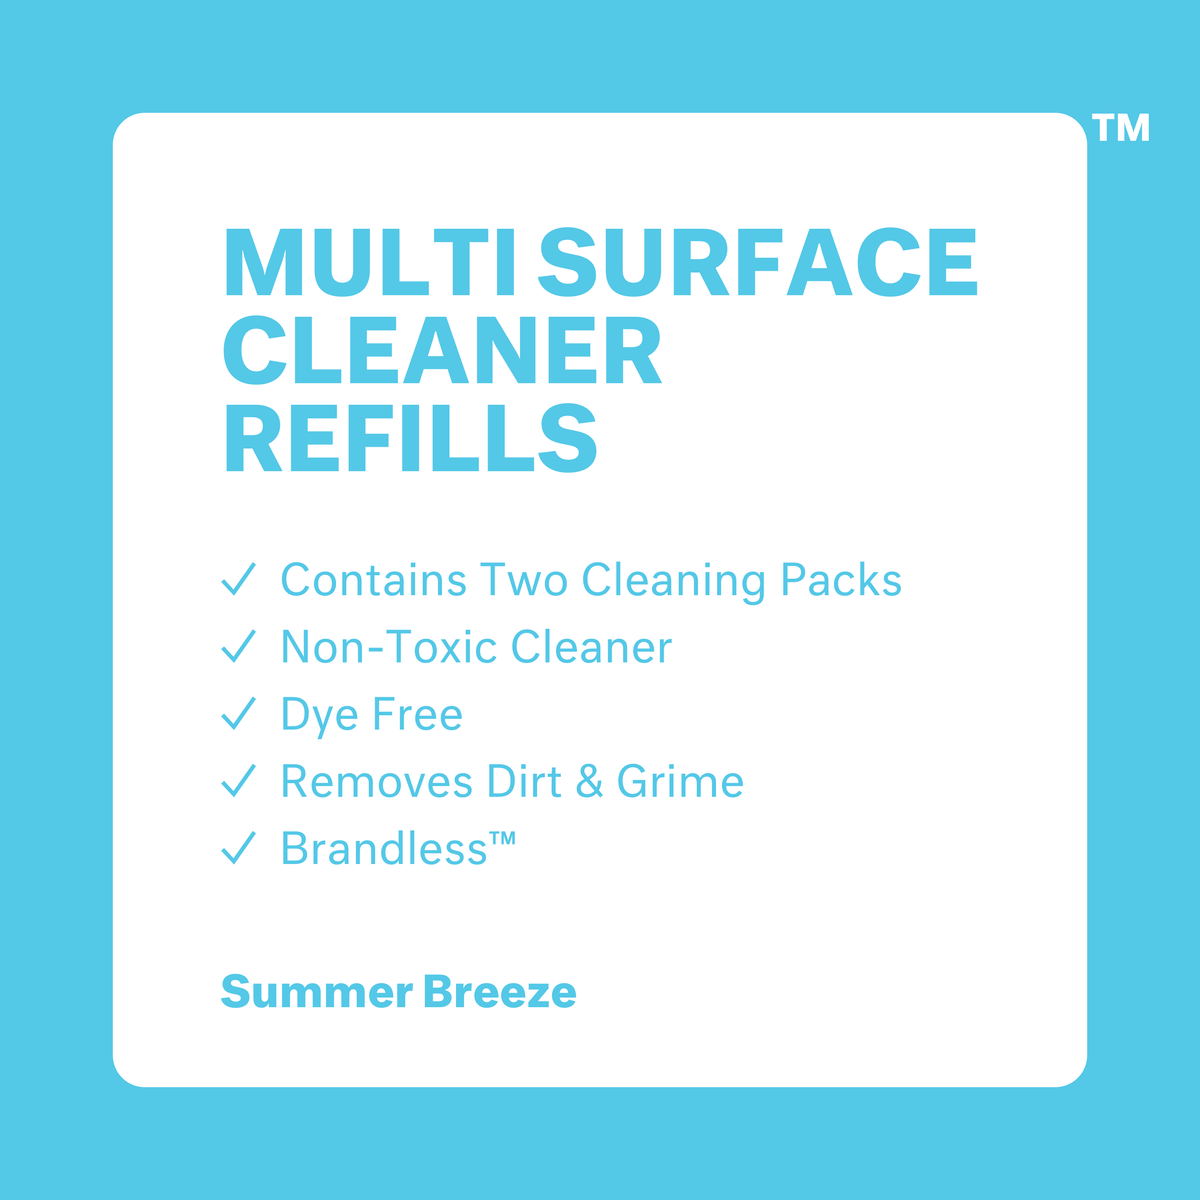 Multi Surface Cleaner Refills 2 pack.  Includes two cleaning packs. Non-toxic cleaner. Dye free. Removes dirt and grime. Brandless. Summer Breeze.